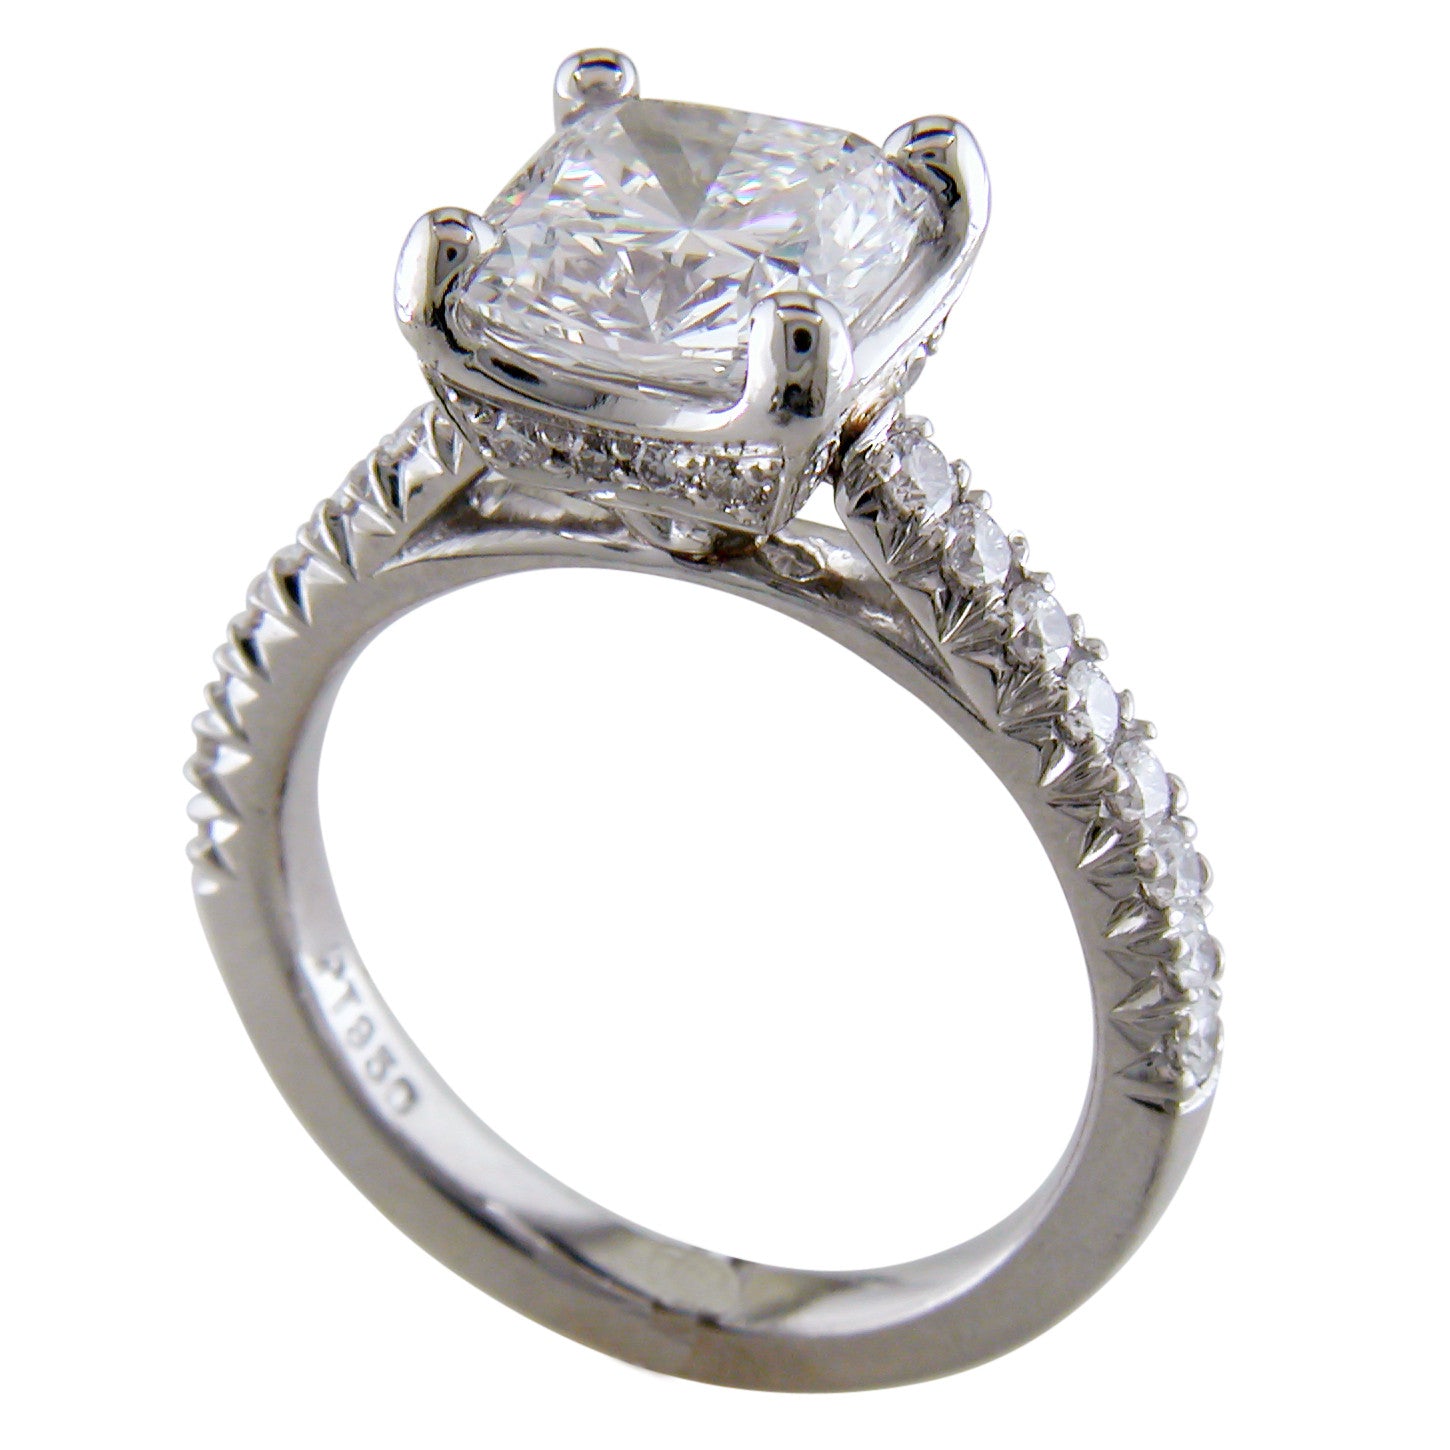 2 Carat Oval Diamond Engagement Ring On 18 Karat White Gold Approximately 3  Carats Total Weight. - Richards Gems and Jewelry